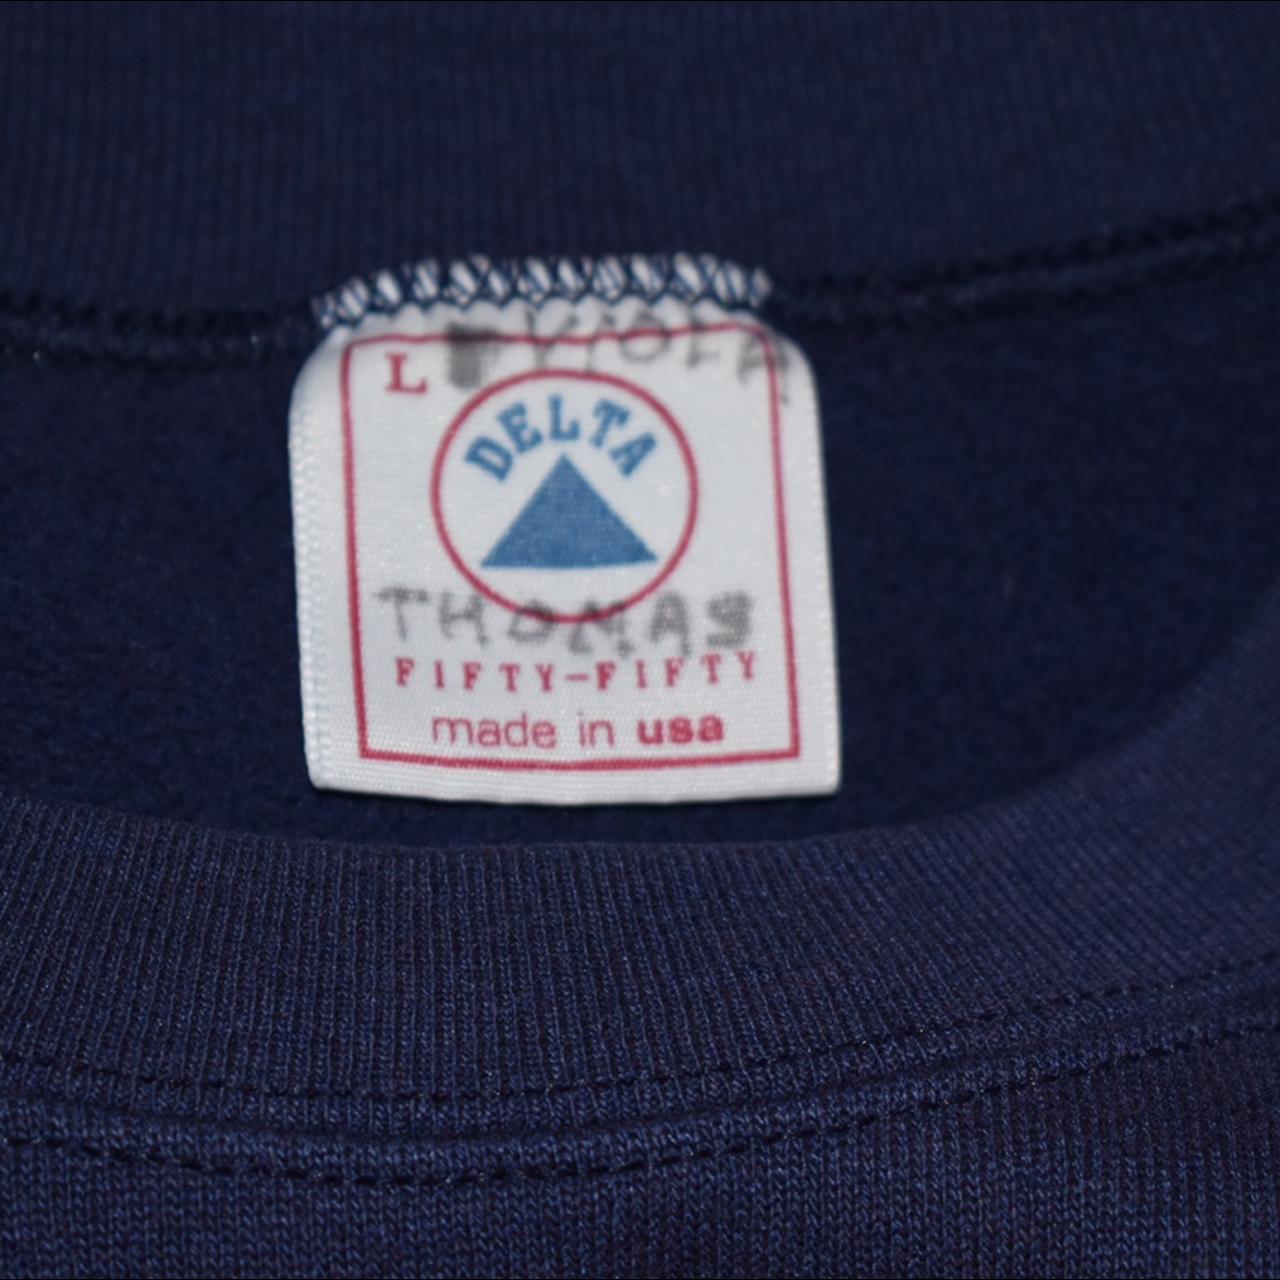 Product Image 4 - Vintage American Classic Crewneck

size: Fits